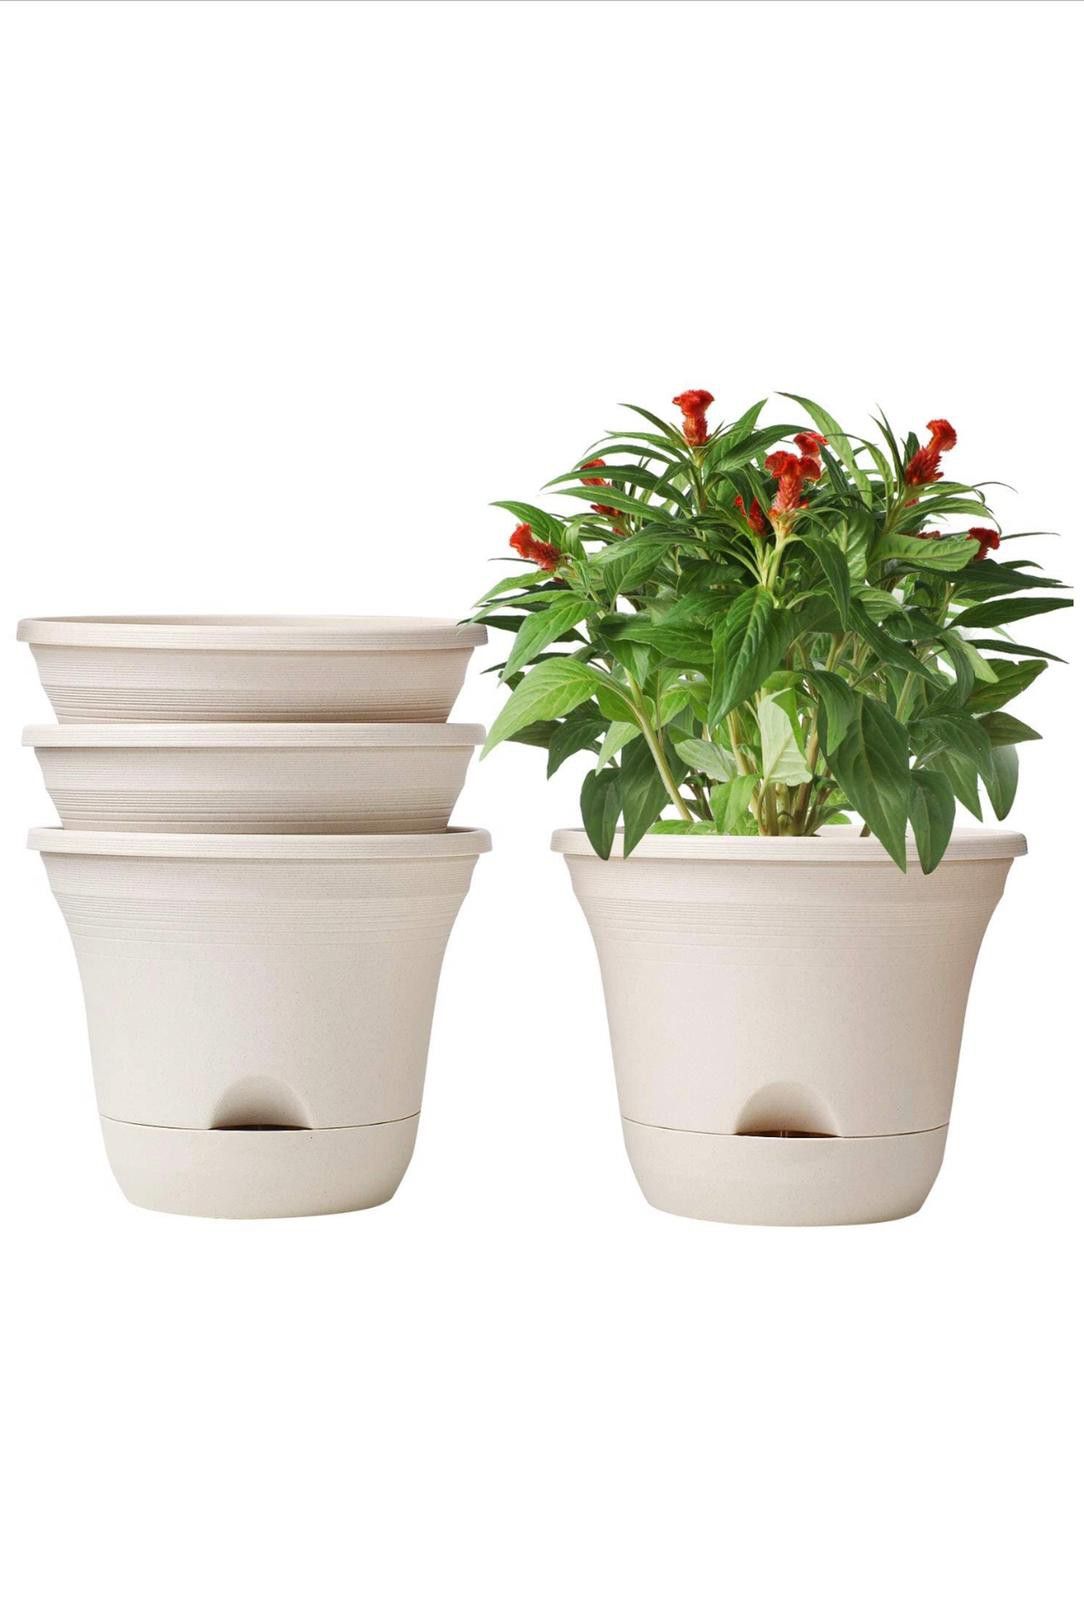 Self Watering Planter Flower Pot Set of 4 New in the Box